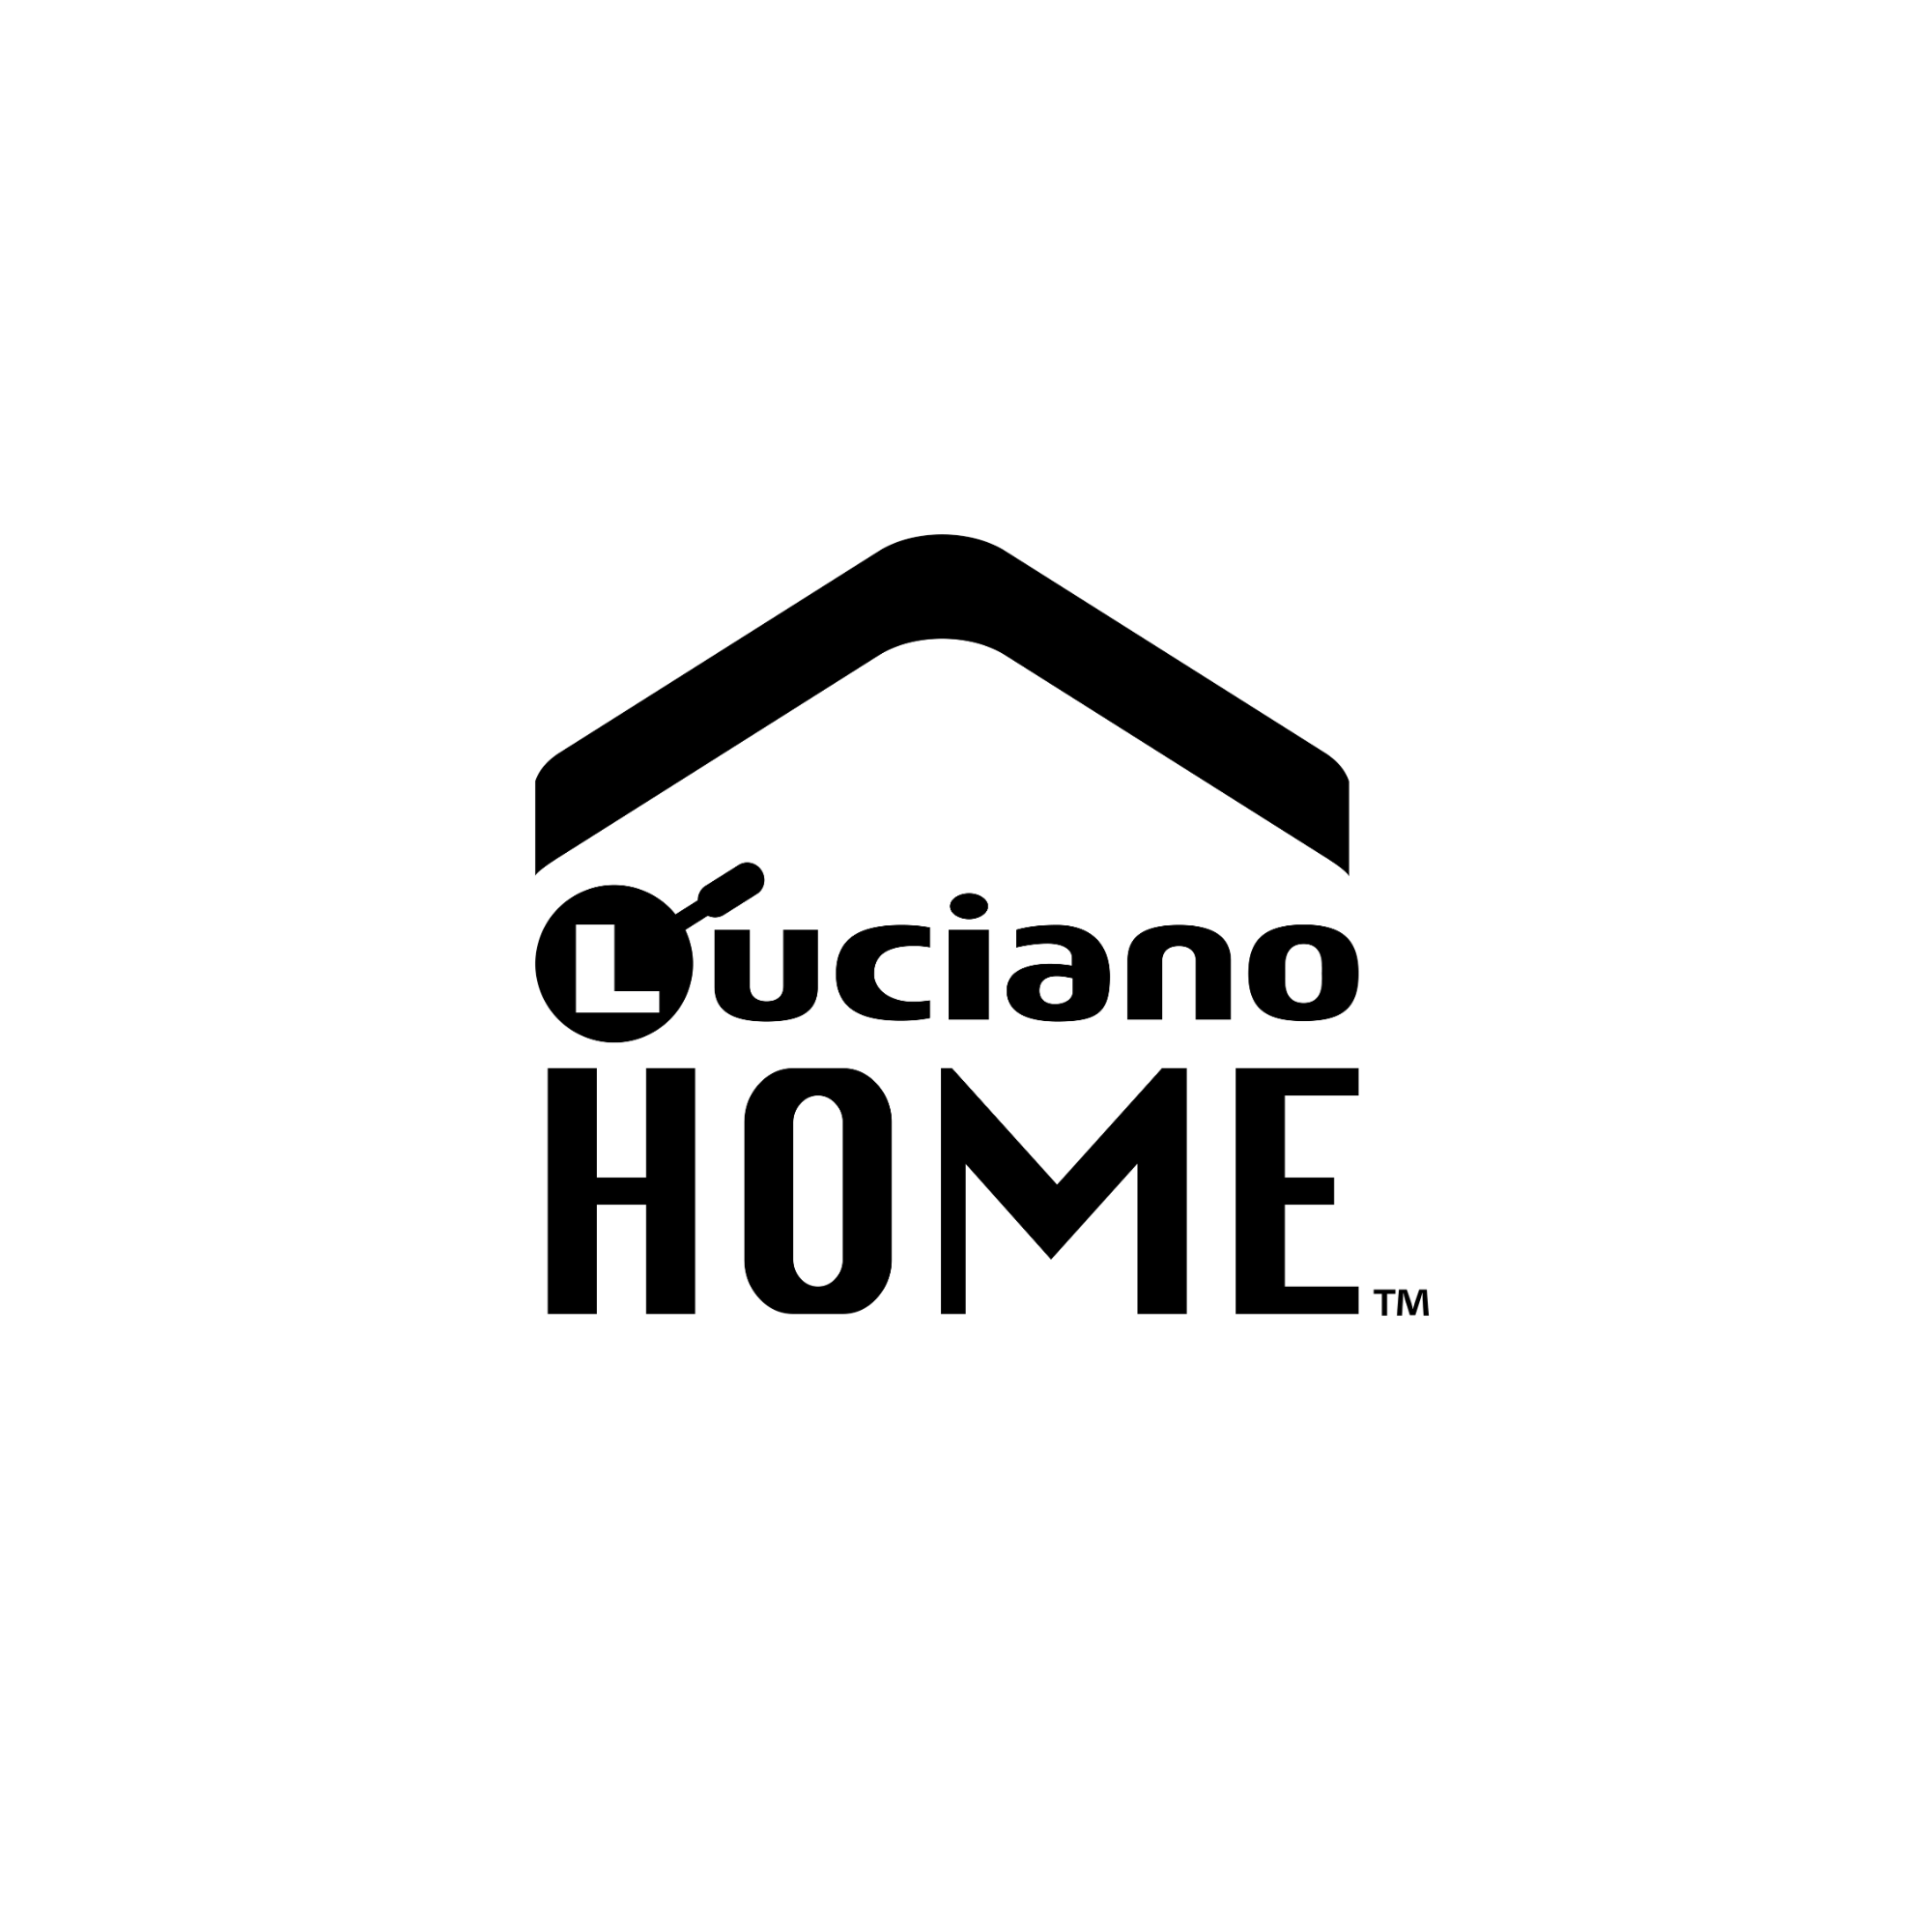 Luciano Home